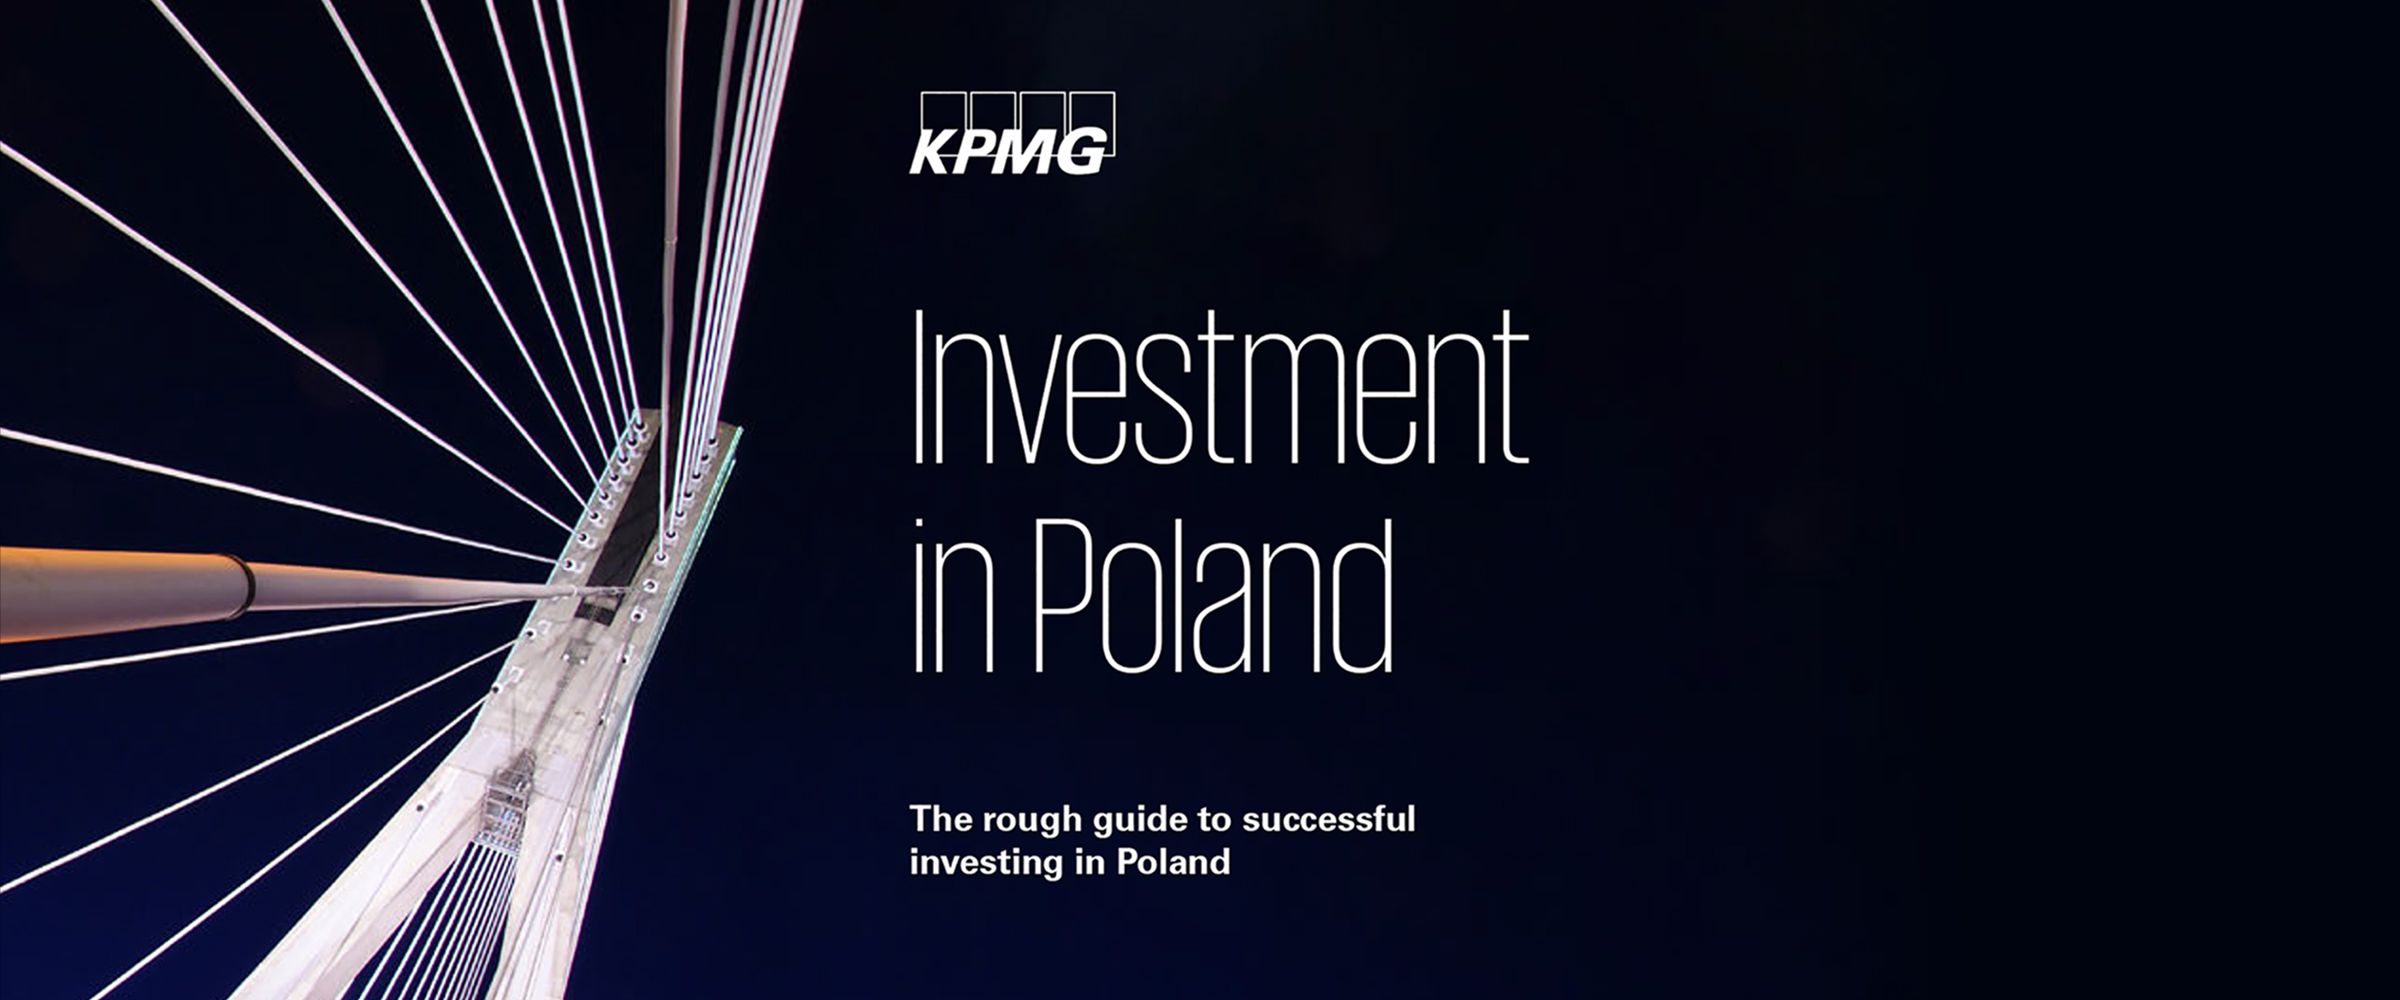 Investment in Poland